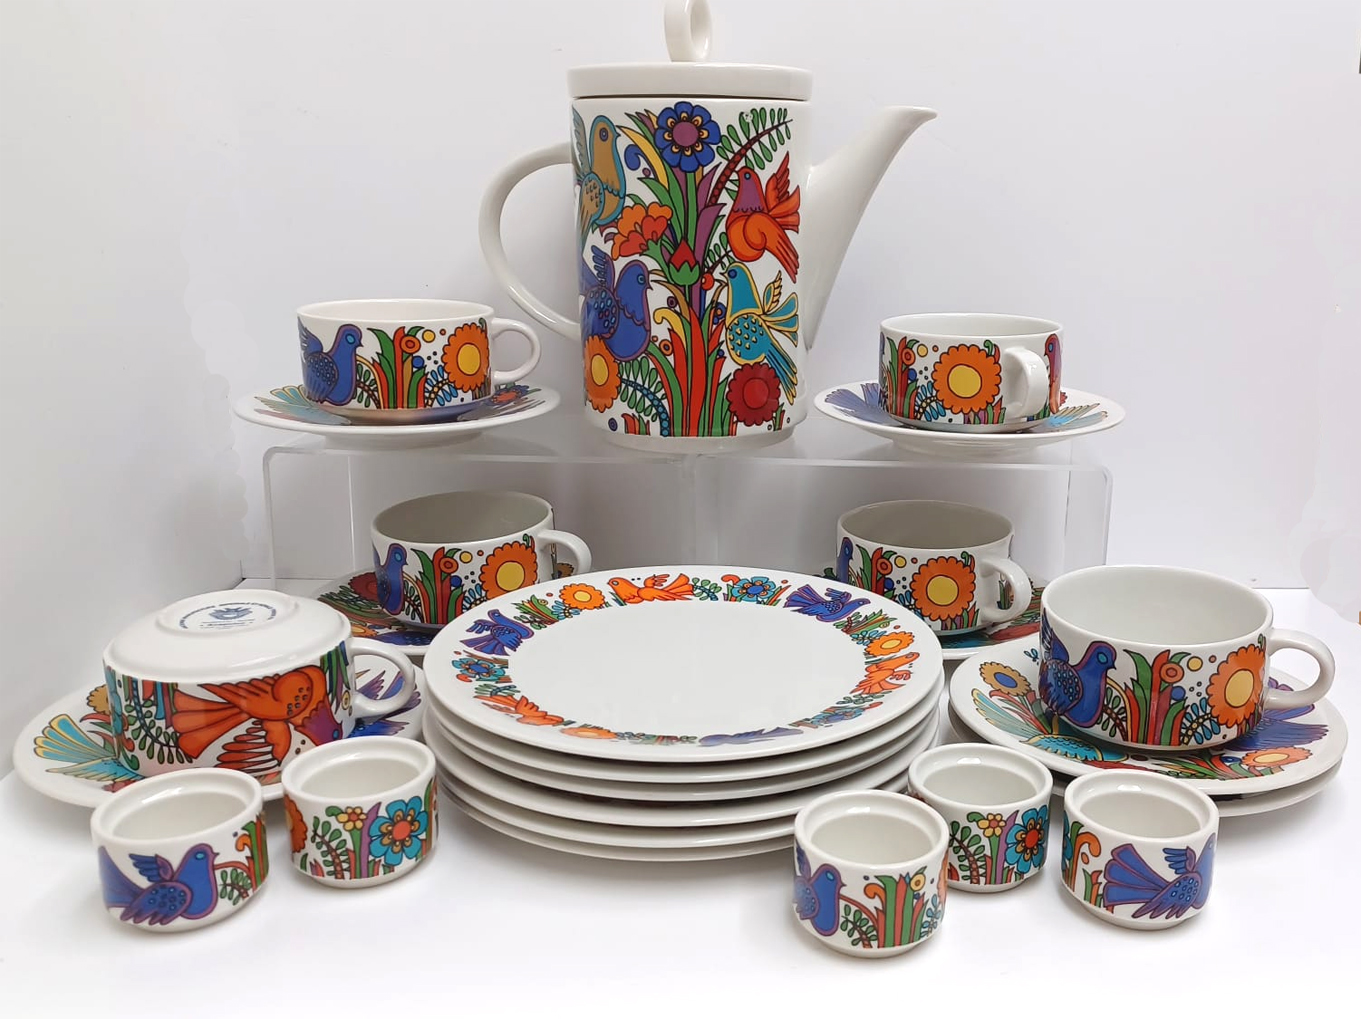 VILLEROY AND BOCH "ACAPULCO" BREAKFAST SET INC. COFFEE POT, 6 PLATES 8", 6 CUPS, 7 SAUCERS, ETC.